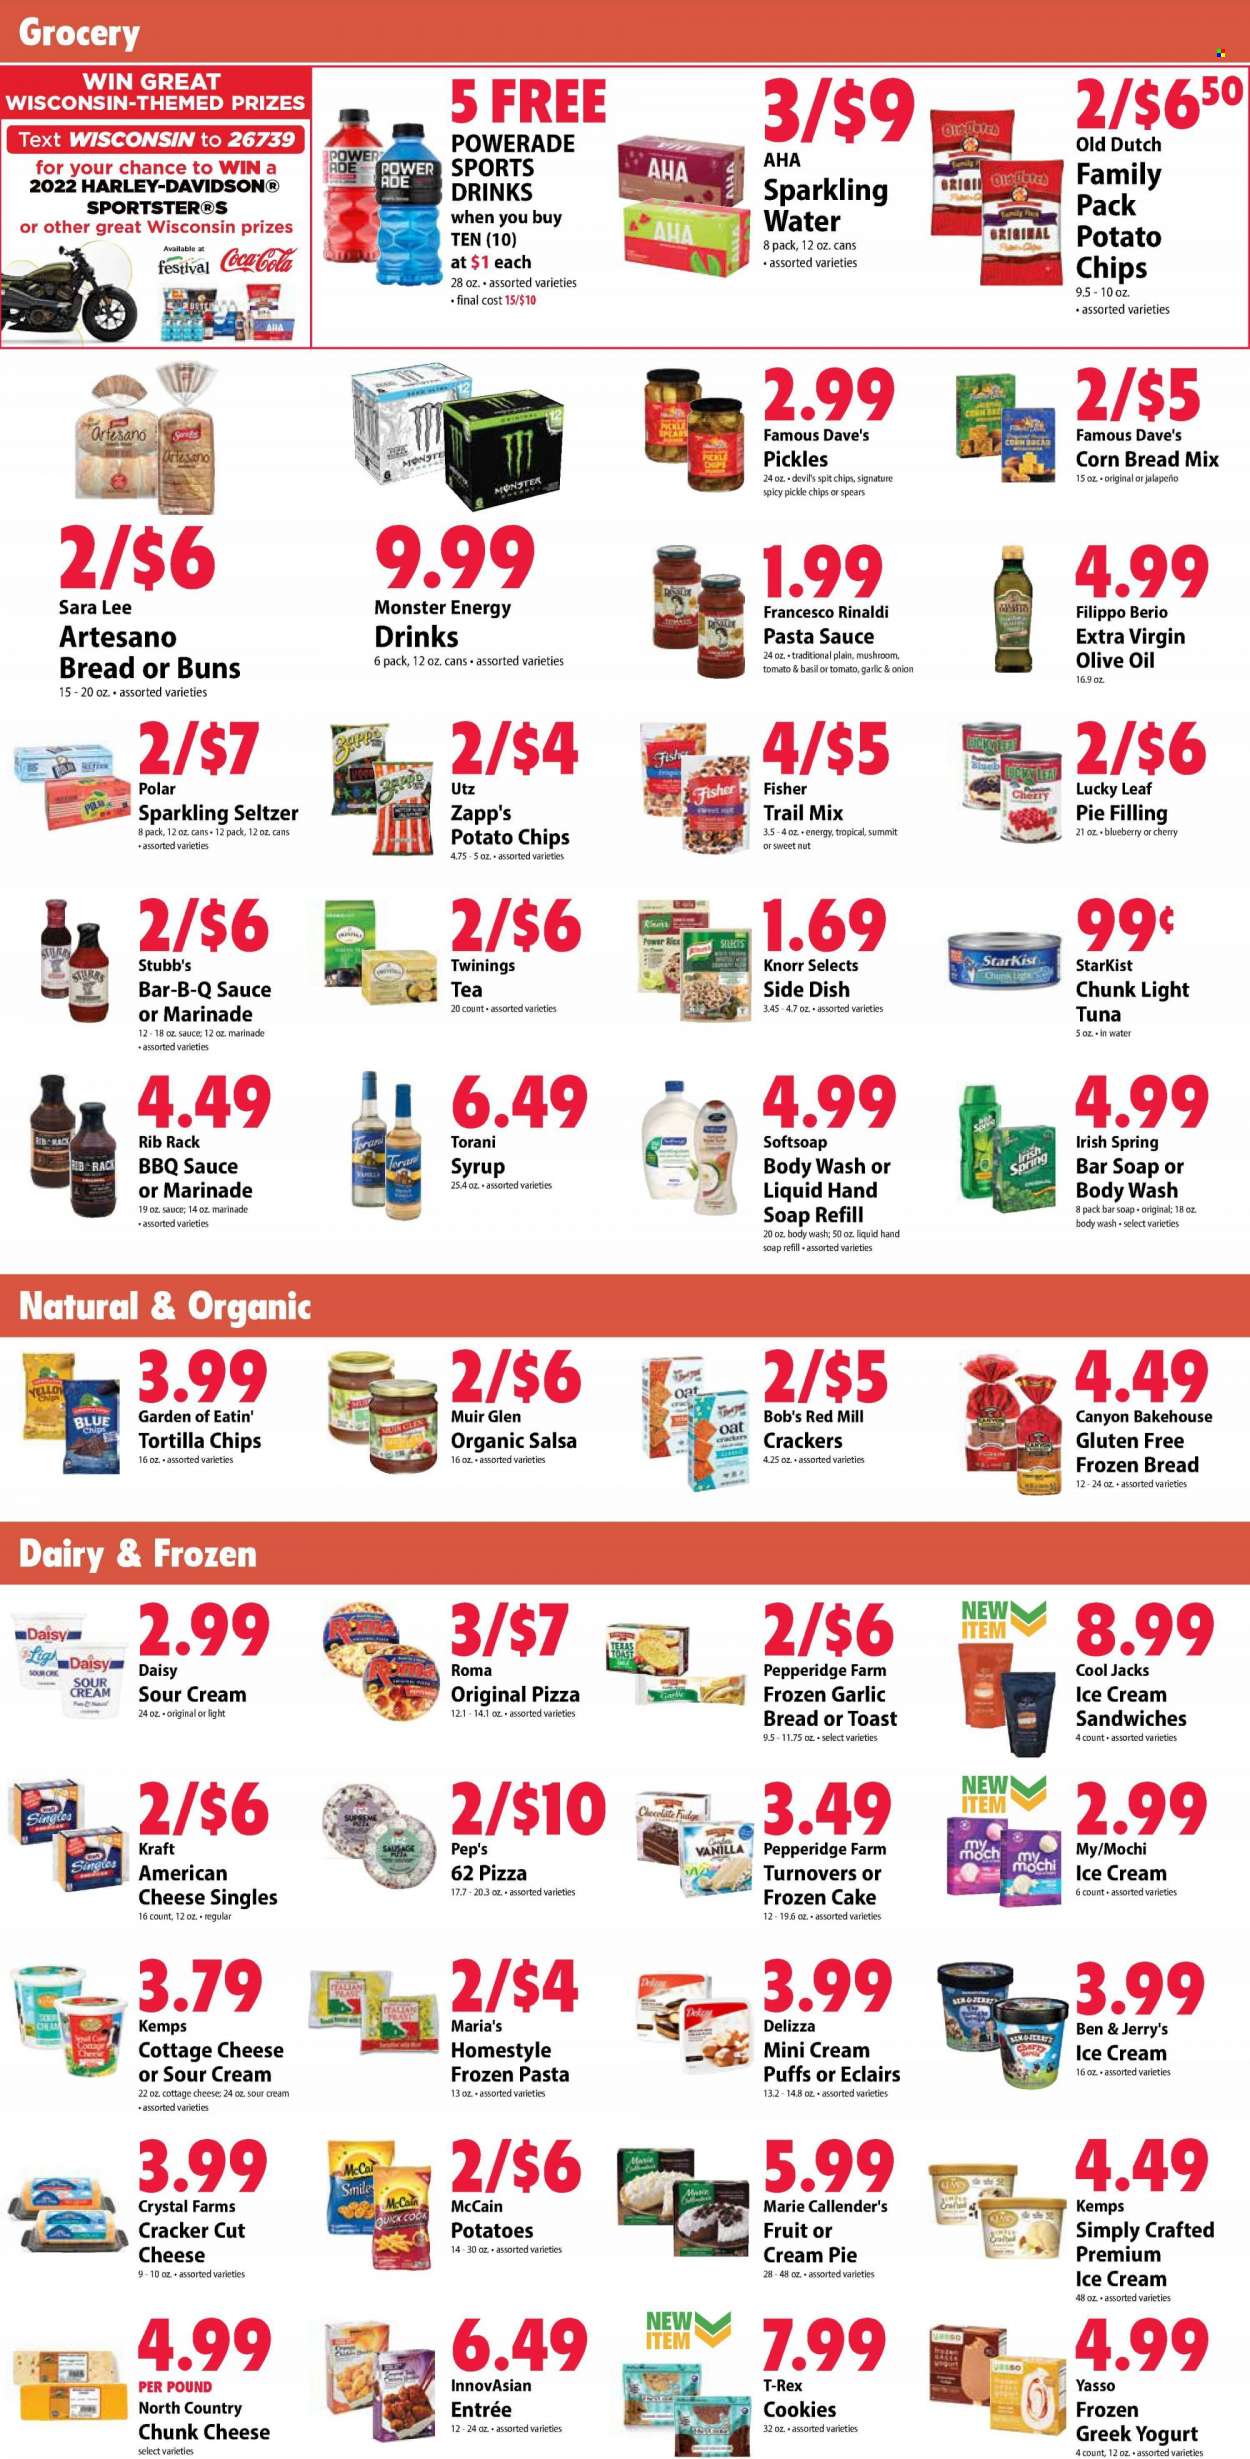 thumbnail - Festival Foods Flyer - 05/18/2022 - 05/24/2022 - Sales products - bread, corn bread, buns, Sara Lee, turnovers, puffs, cream pie, cream puffs, dessert, fruit pie, éclairs, tuna, StarKist, pizza, pasta sauce, Knorr, sauce, Marie Callender's, Kraft®, ready meal, american cheese, cottage cheese, chunk cheese, Kemps, greek yoghurt, sour cream, ice cream sandwich, Ben & Jerry's, McCain, potato fries, frozen cakes, crackers, tortilla chips, potato chips, pie filling, oats, canned tuna, pickles, light tuna, canned fish, pickled vegetables, BBQ sauce, marinade, extra virgin olive oil, olive oil, syrup, trail mix, Coca-Cola, Powerade, energy drink, soft drink, Monster Energy, electrolyte drink, seltzer water, sparkling water, carbonated soft drink, Twinings, ribs, body wash, Softsoap, hand soap, soap bar, soap. Page 3.